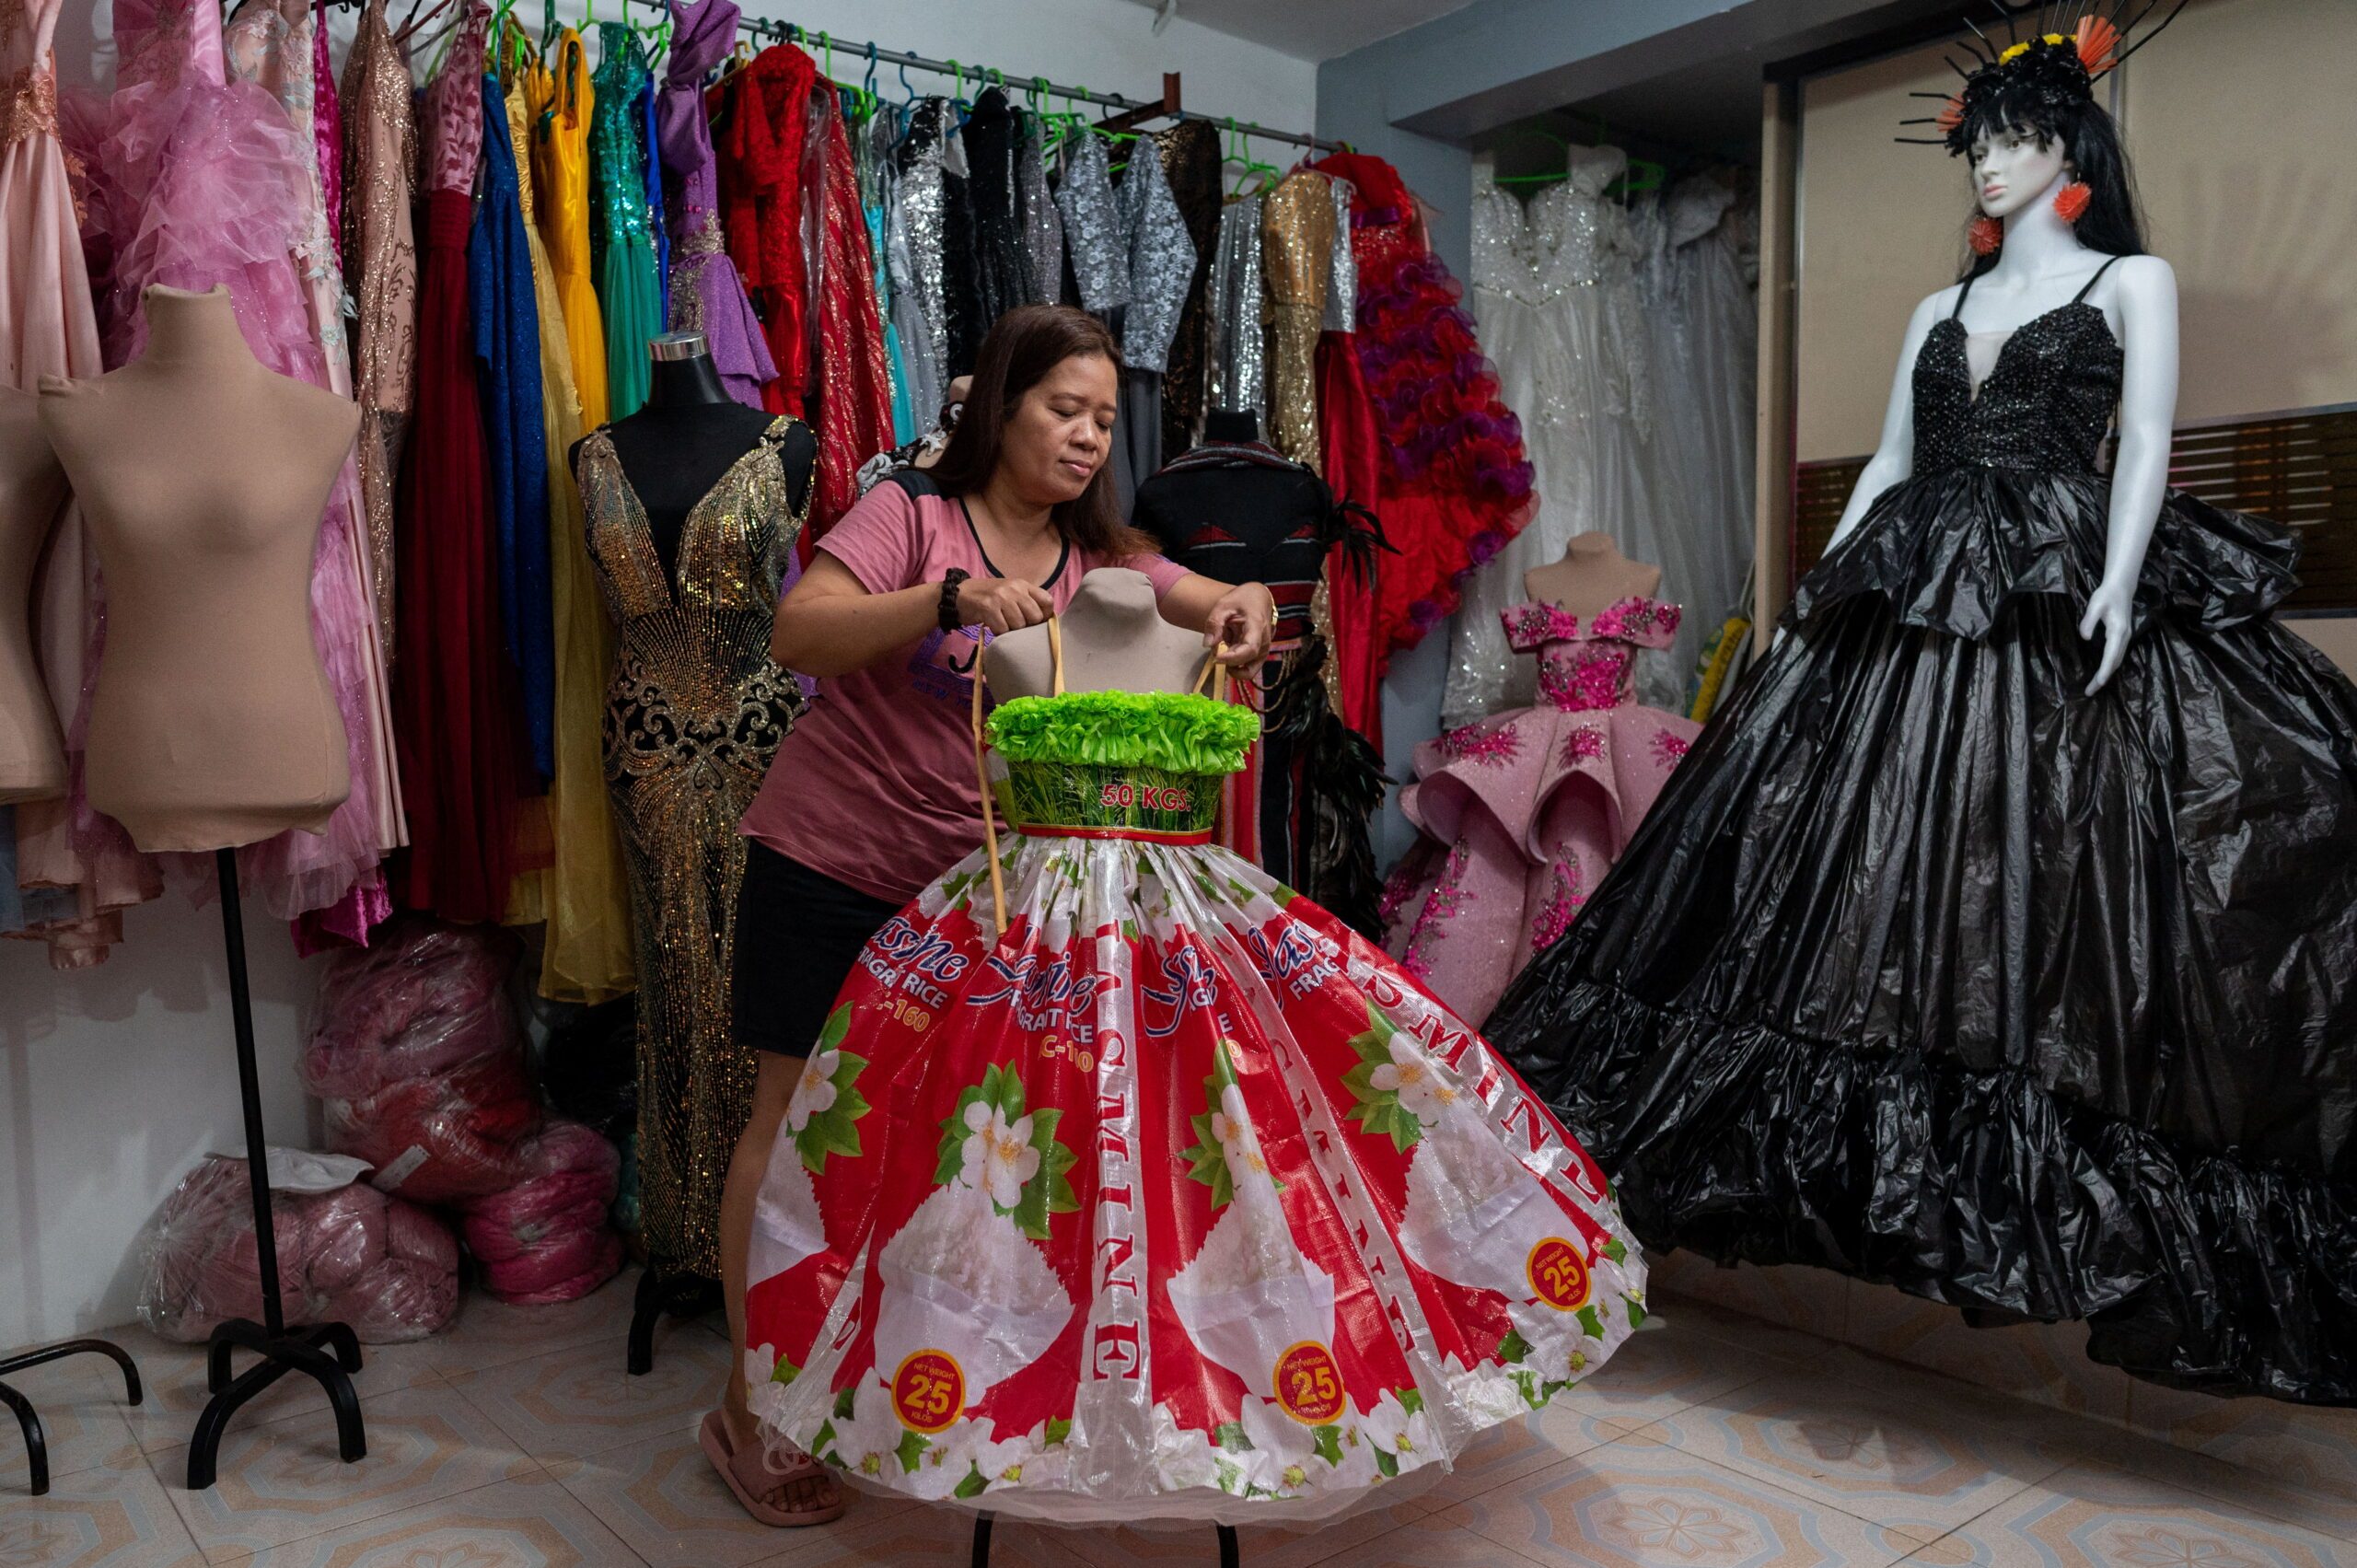 Filipina designer Lenora Buenviaje creates gowns out of recycled trash